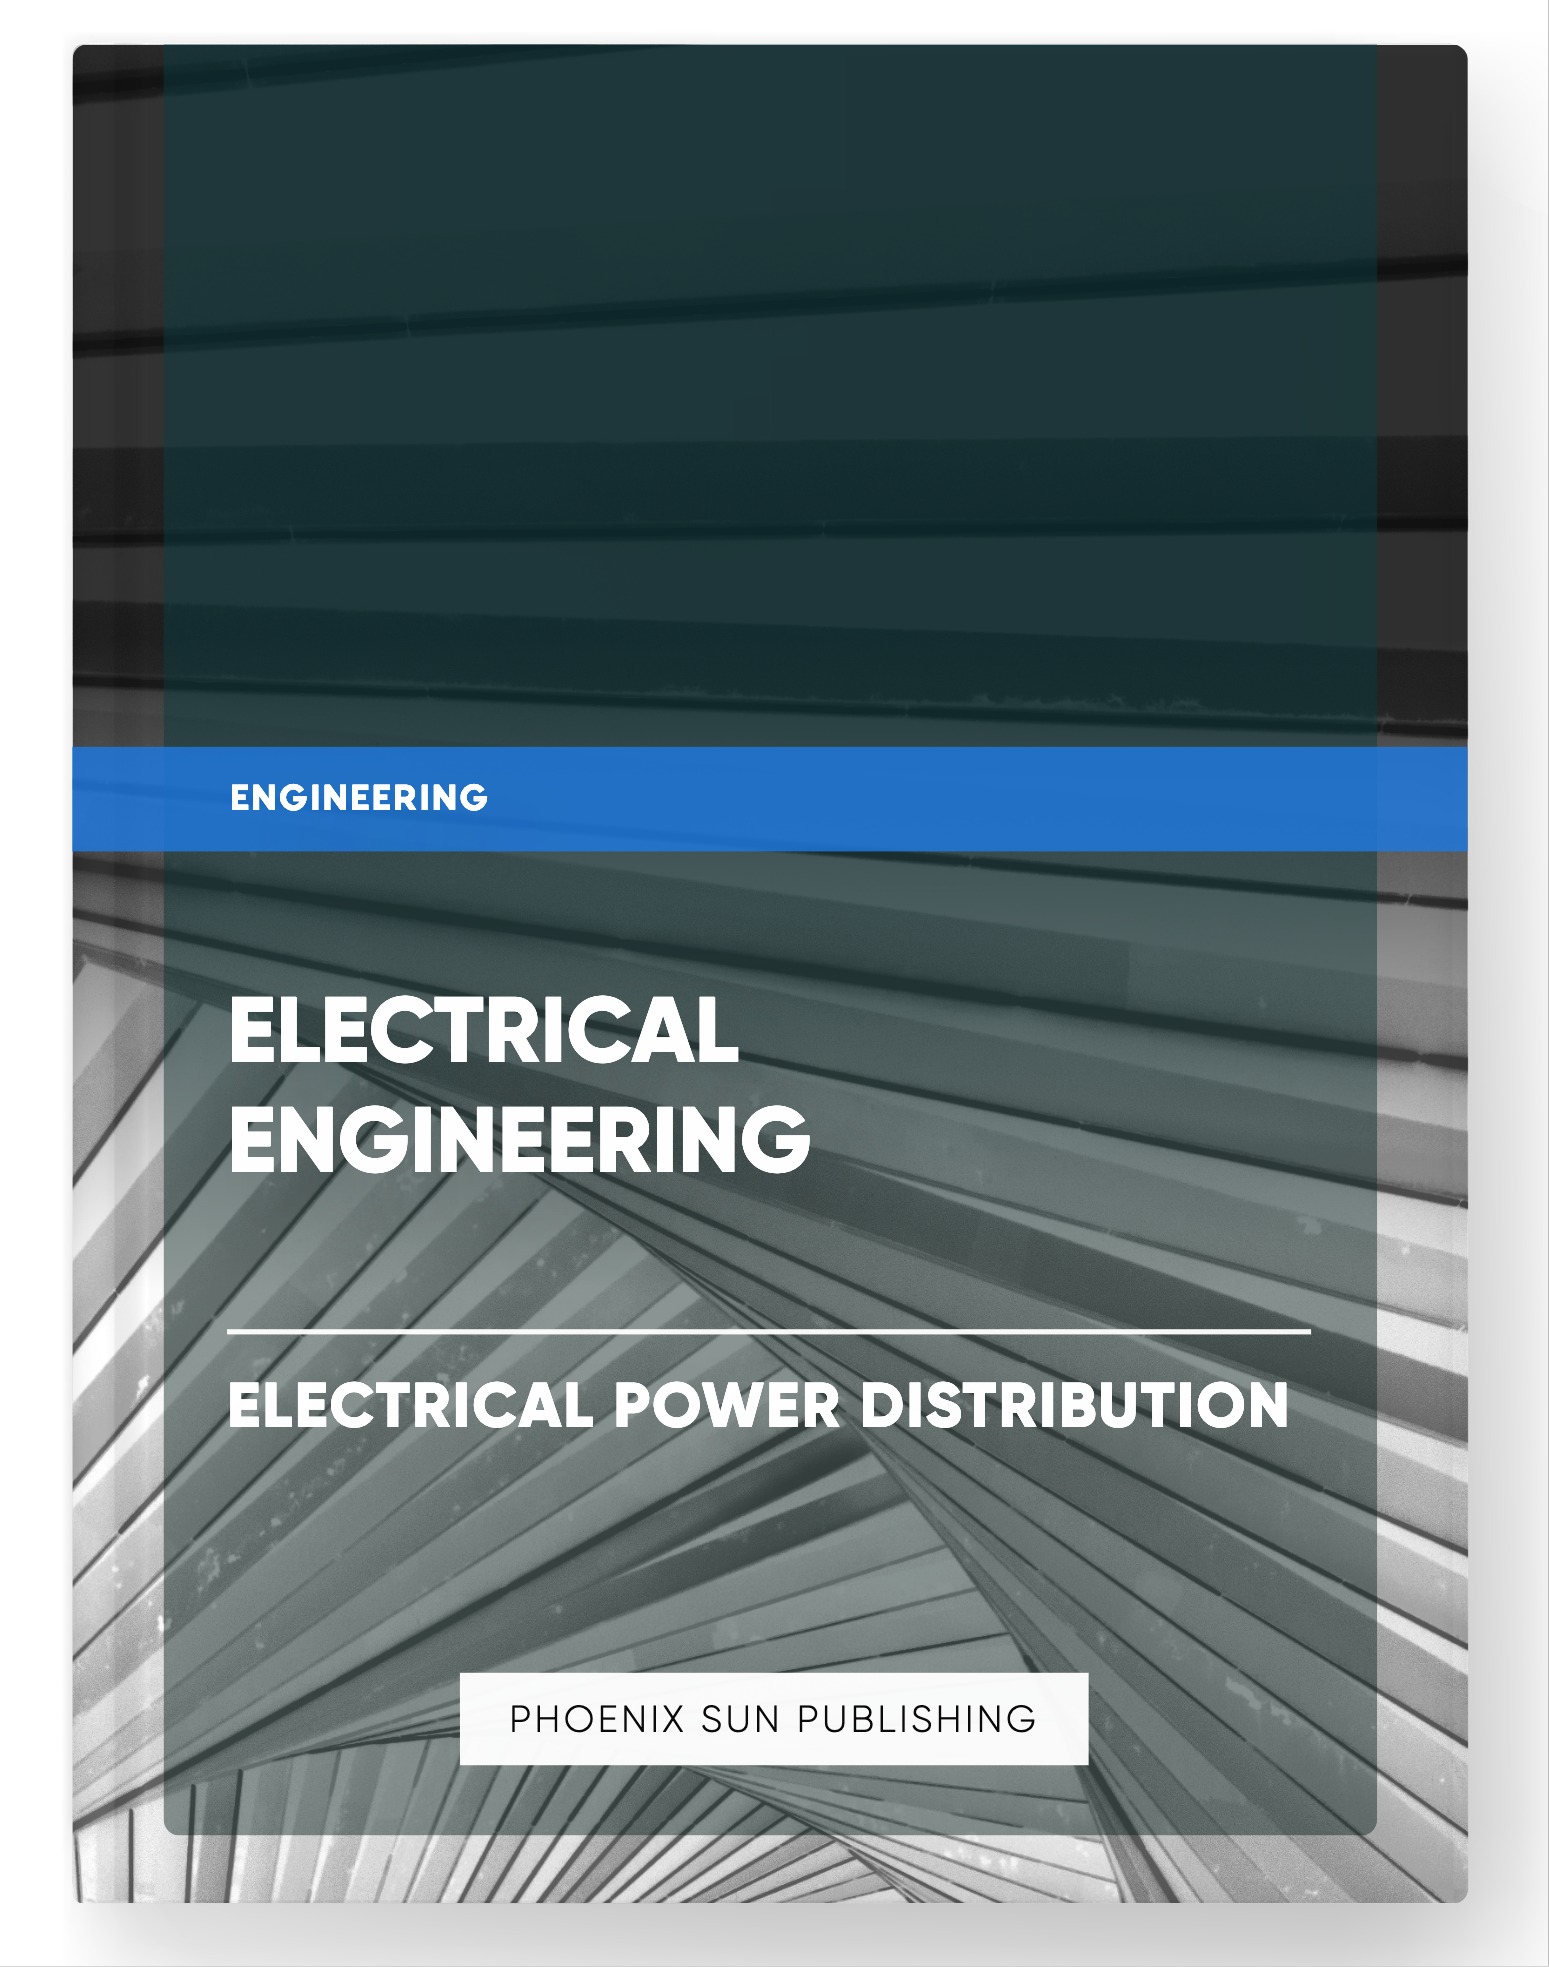 Electrical Engineering – Electrical Power Distribution